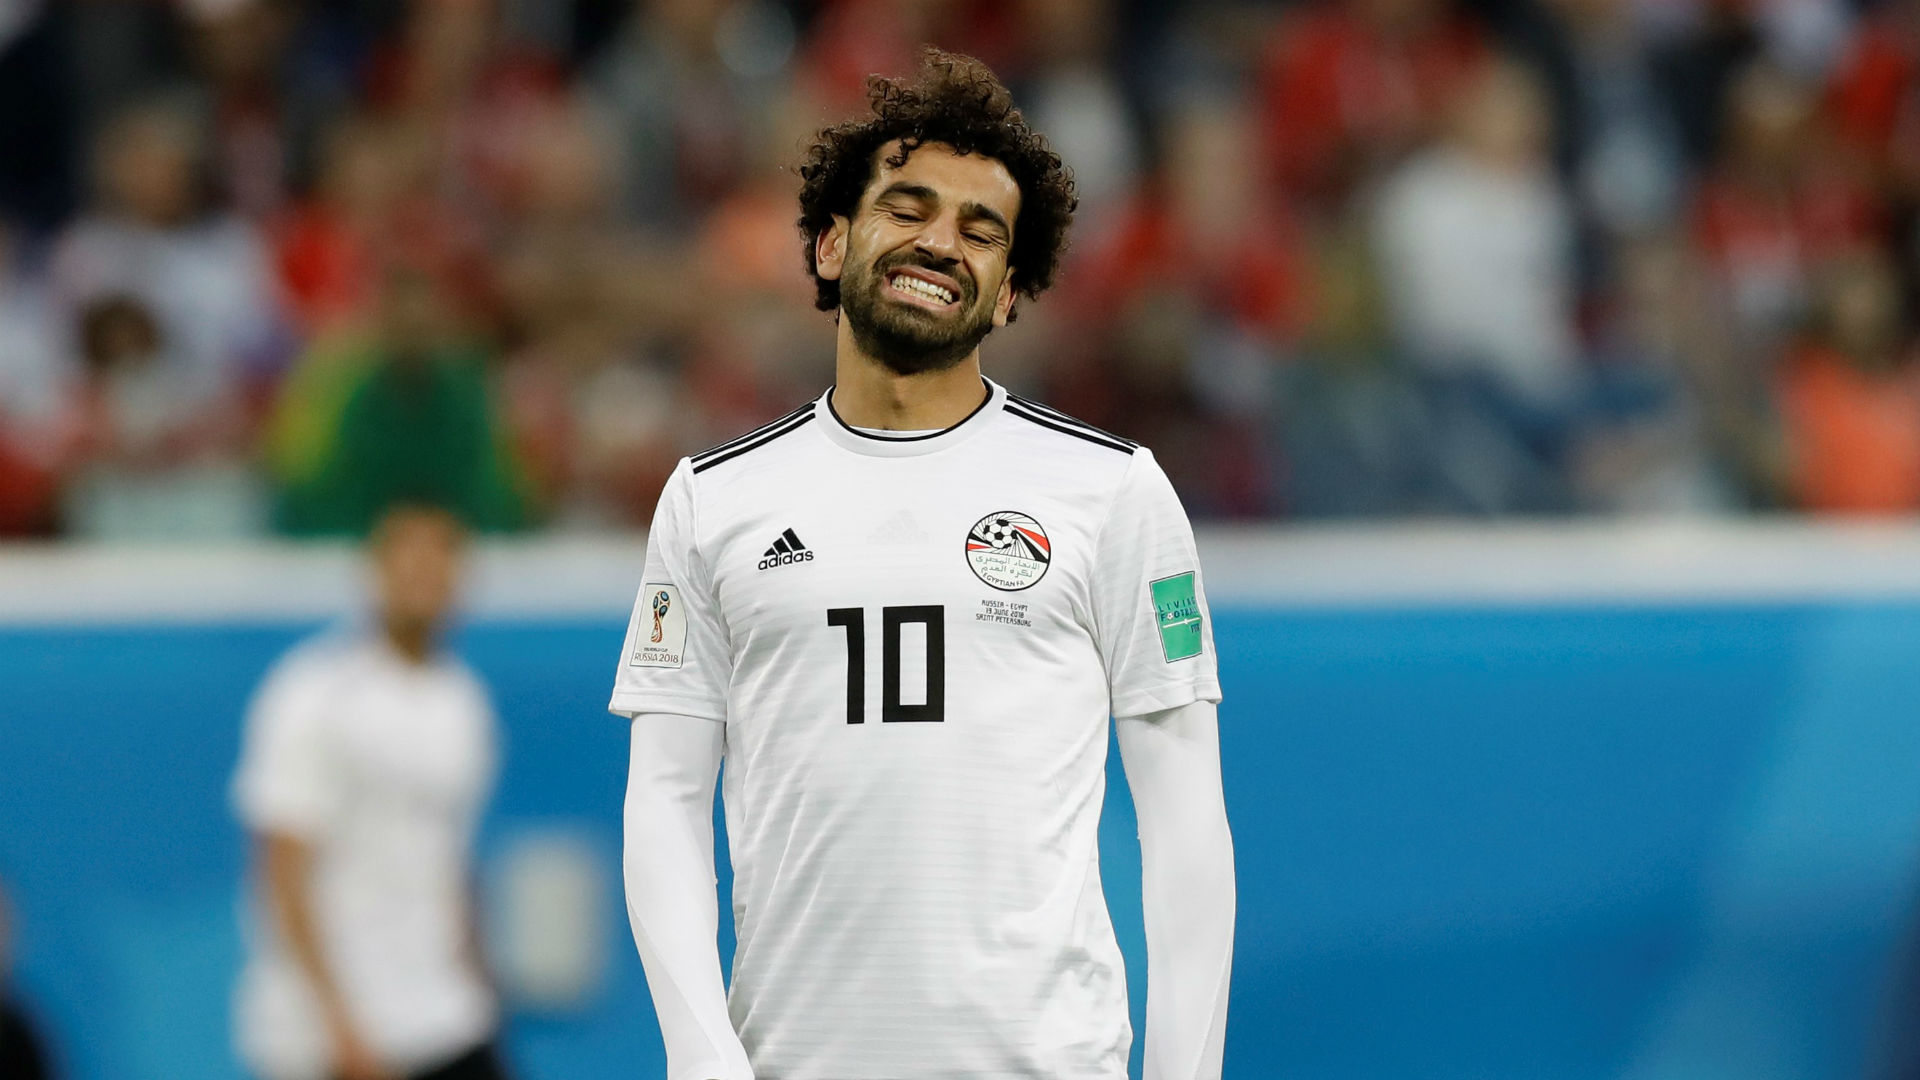 Russia Frolicks Past Egypt at the World Cup